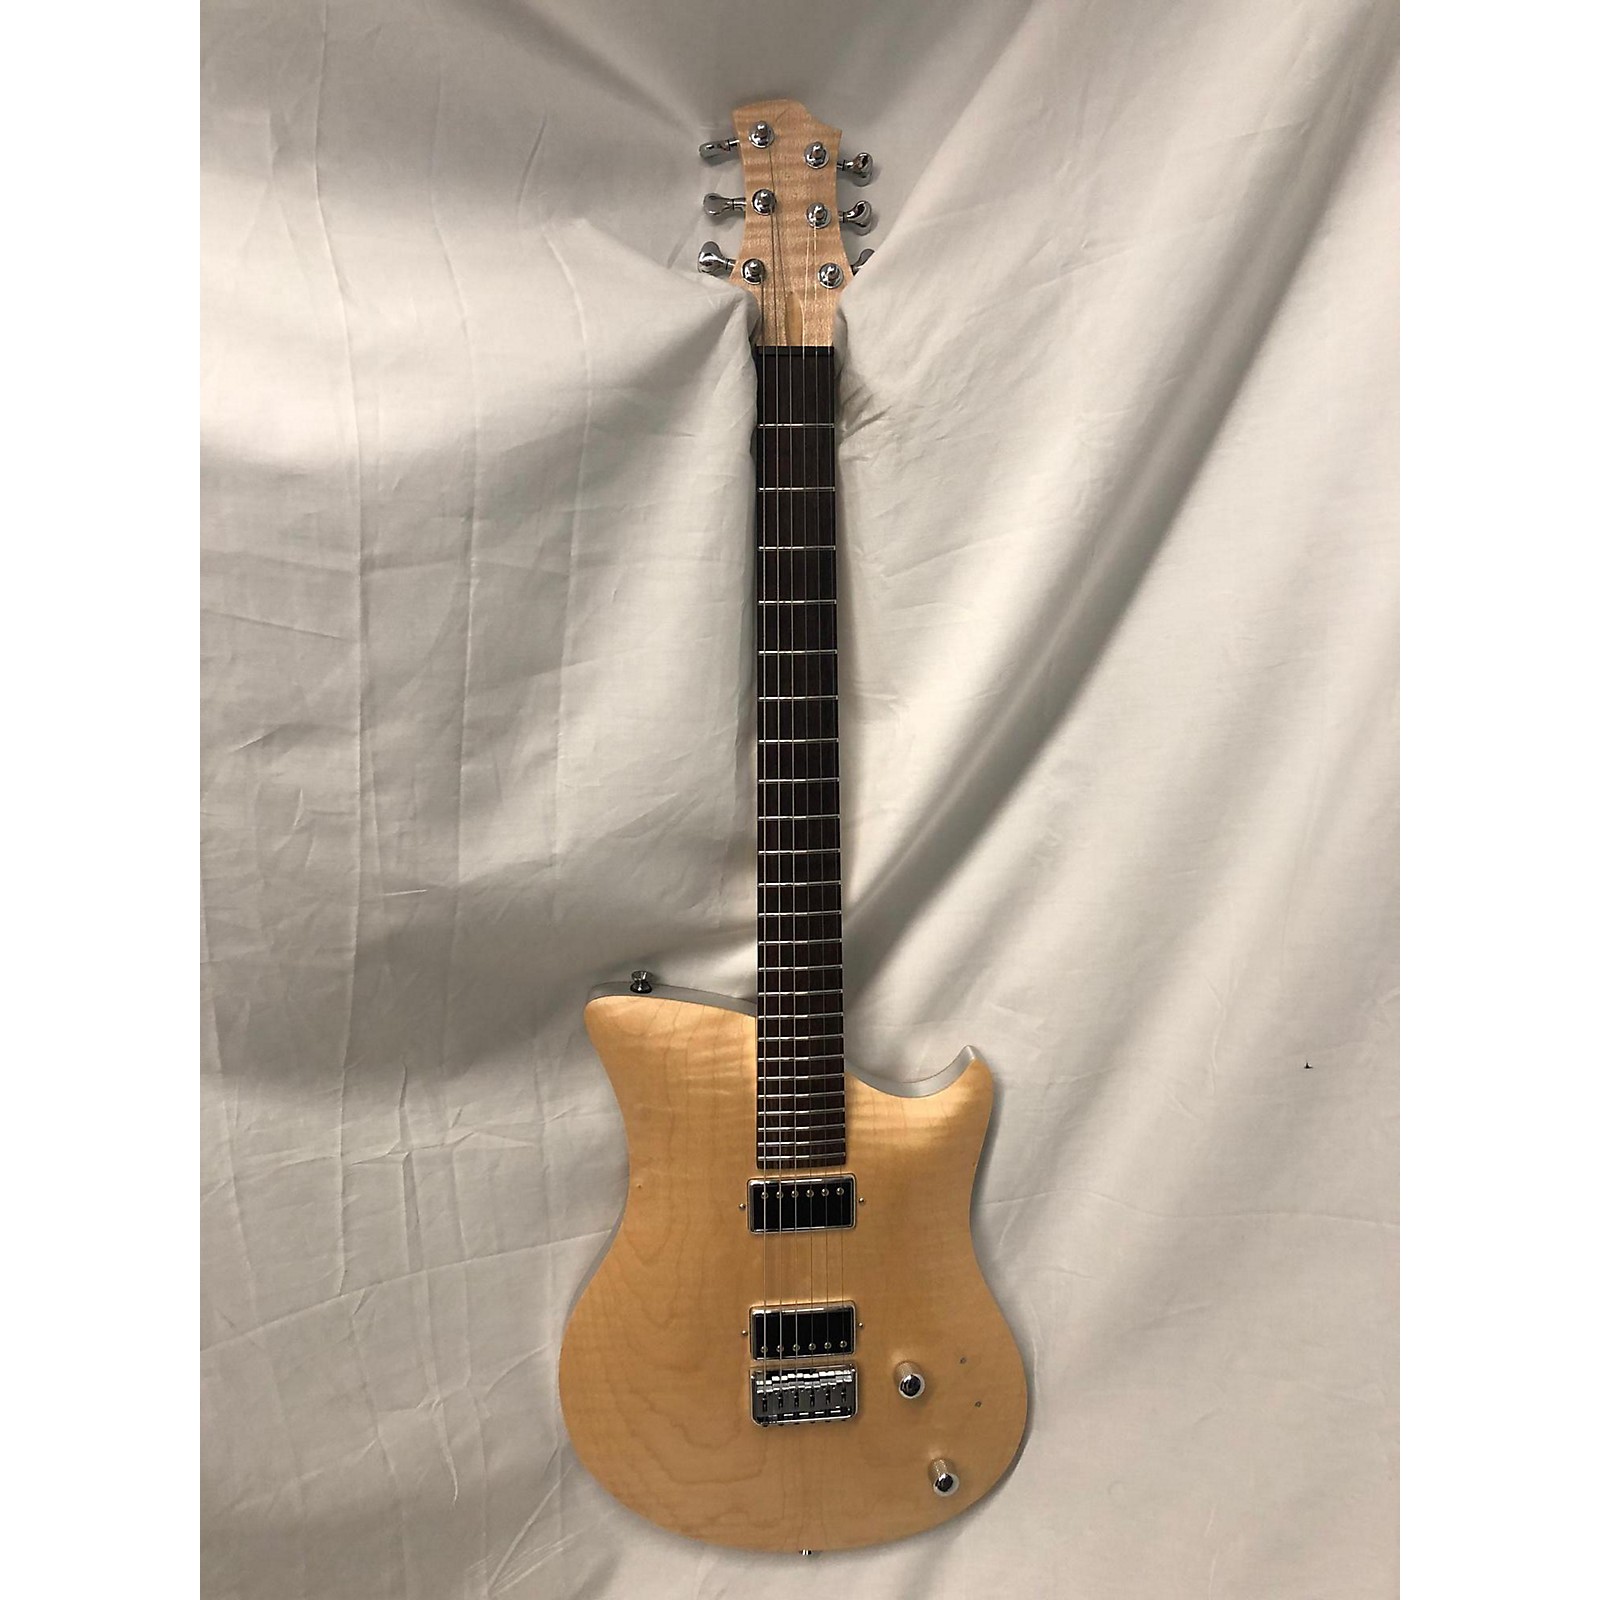 Used Relish Guitars Jane Hollow Body Electric Guitar Flame maple ...